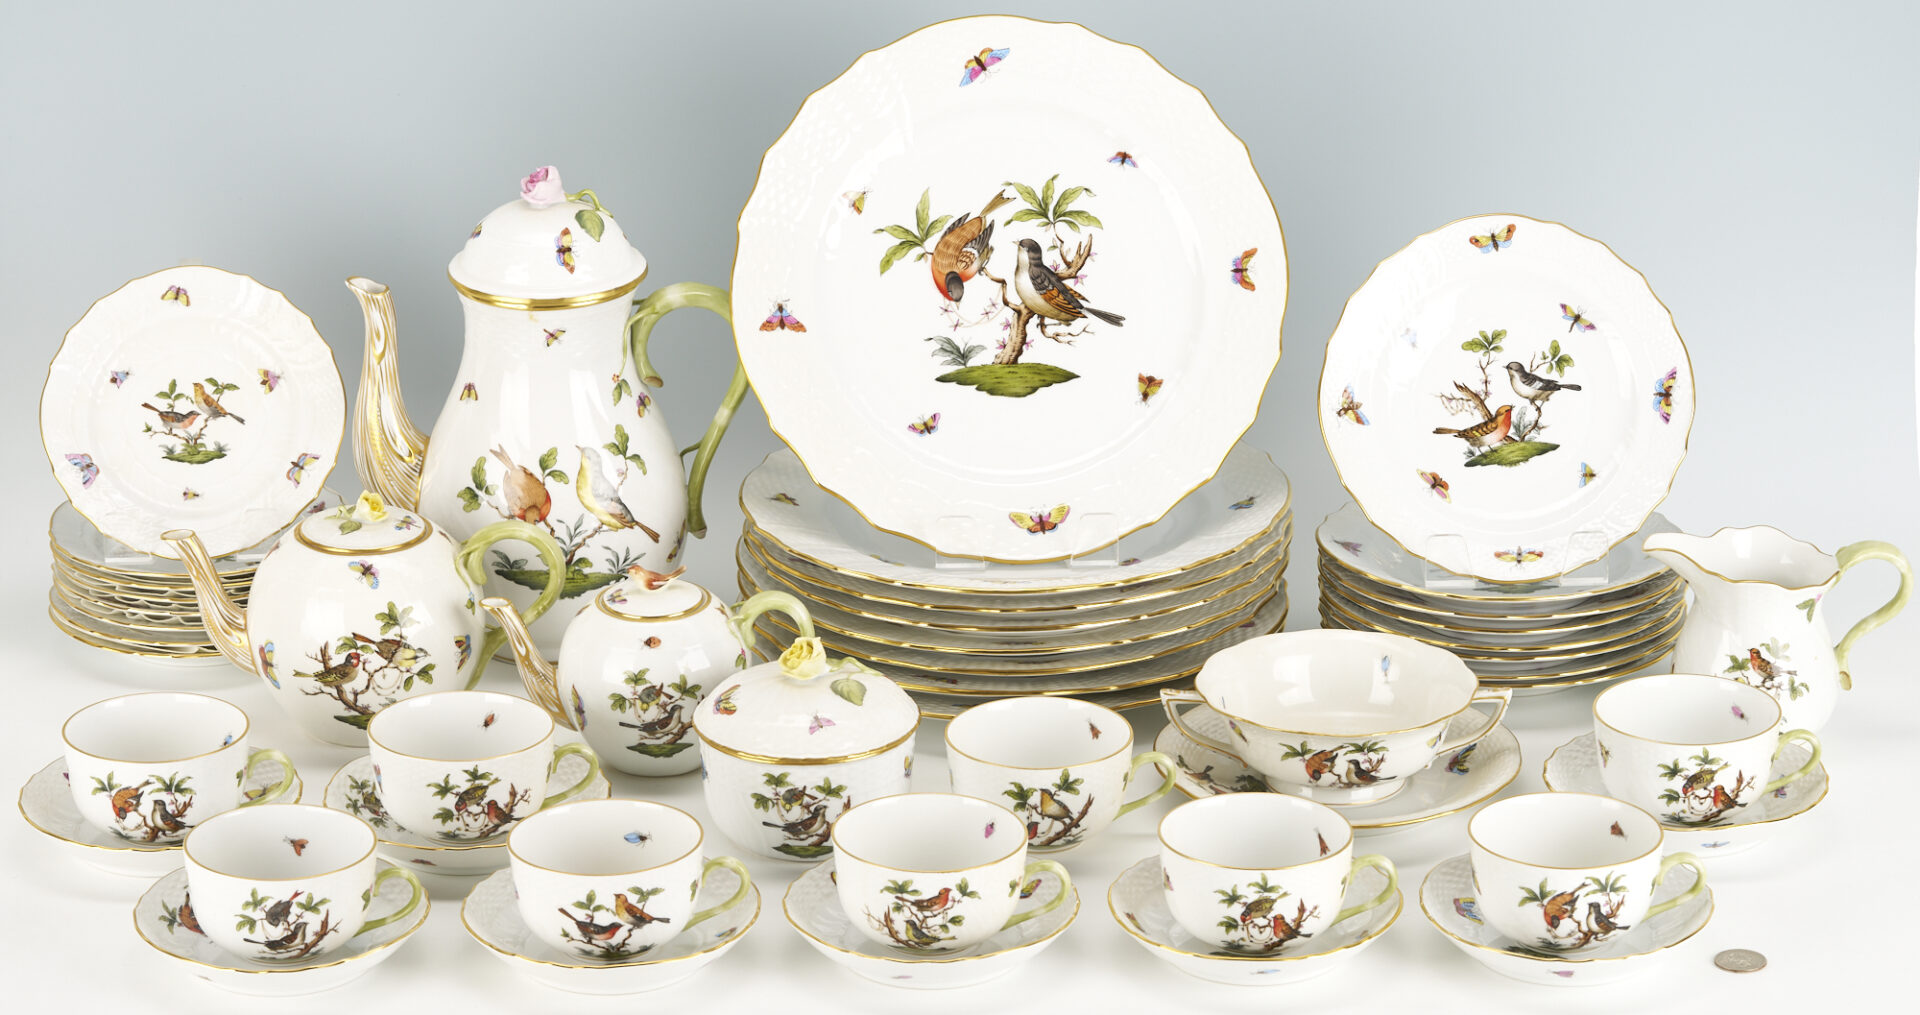 Lot 219: 48 Herend Porcelain Dinnerware Pieces, Partial Service for 8